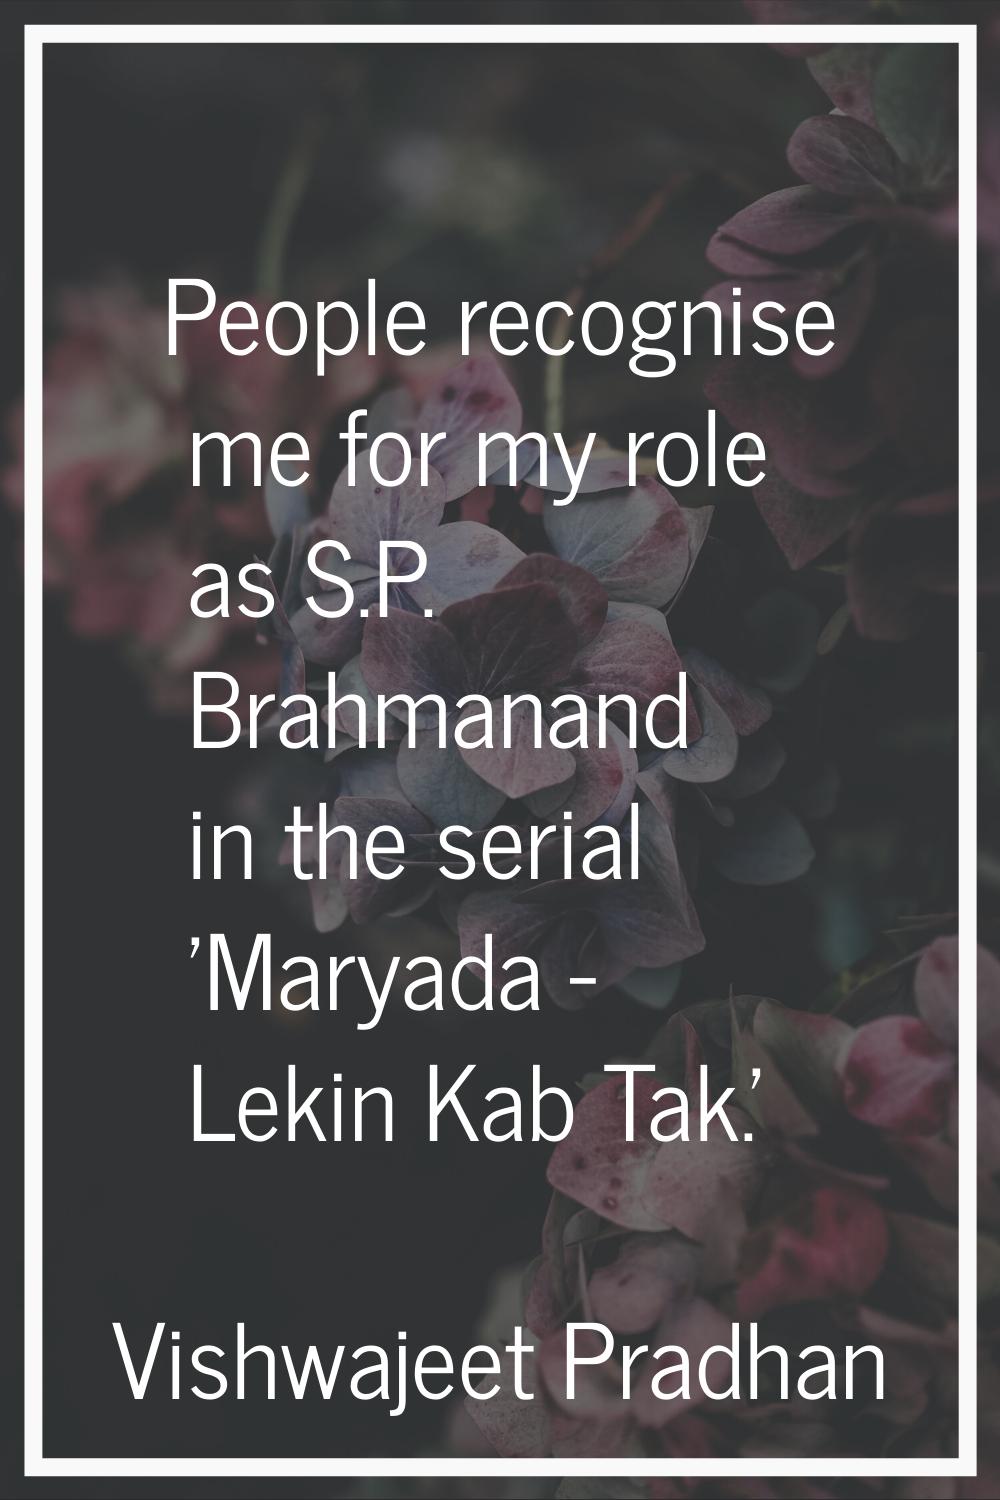 People recognise me for my role as S.P. Brahmanand in the serial 'Maryada - Lekin Kab Tak.'